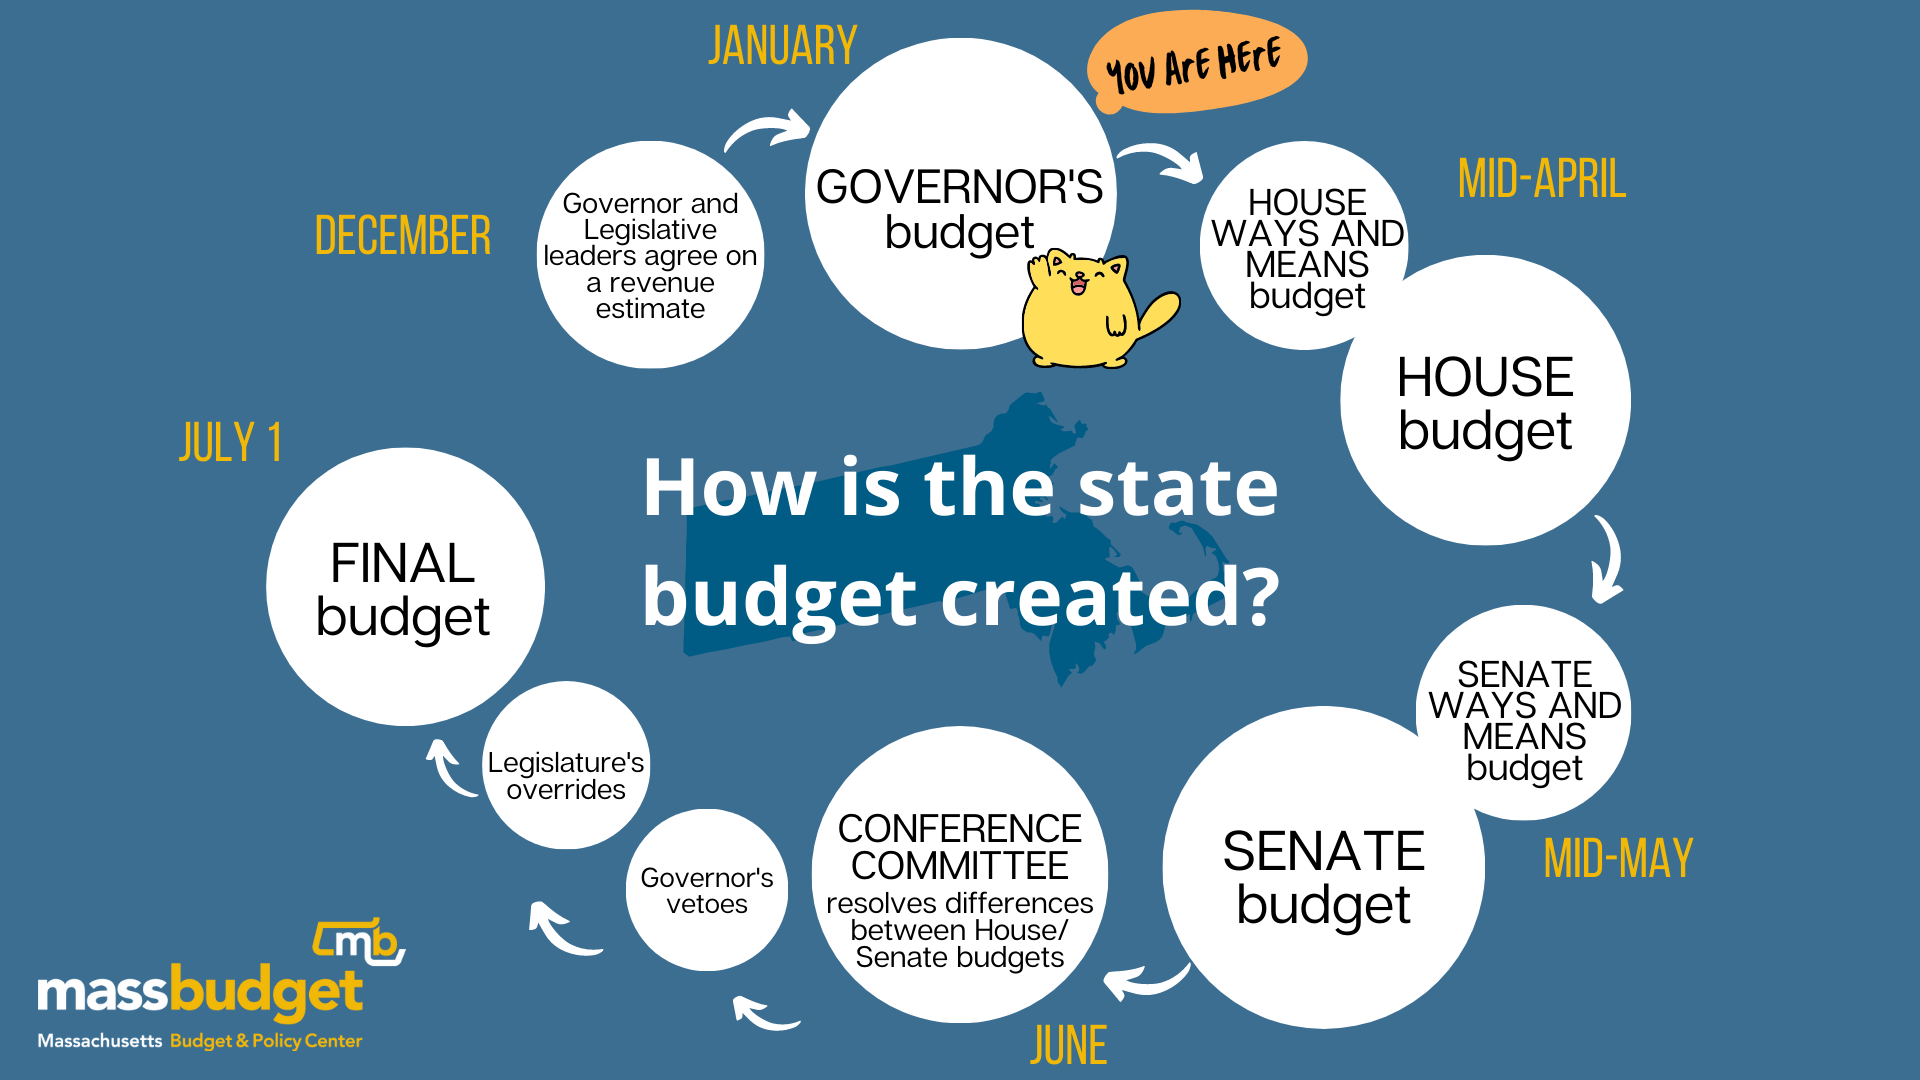 How is the state budget created?